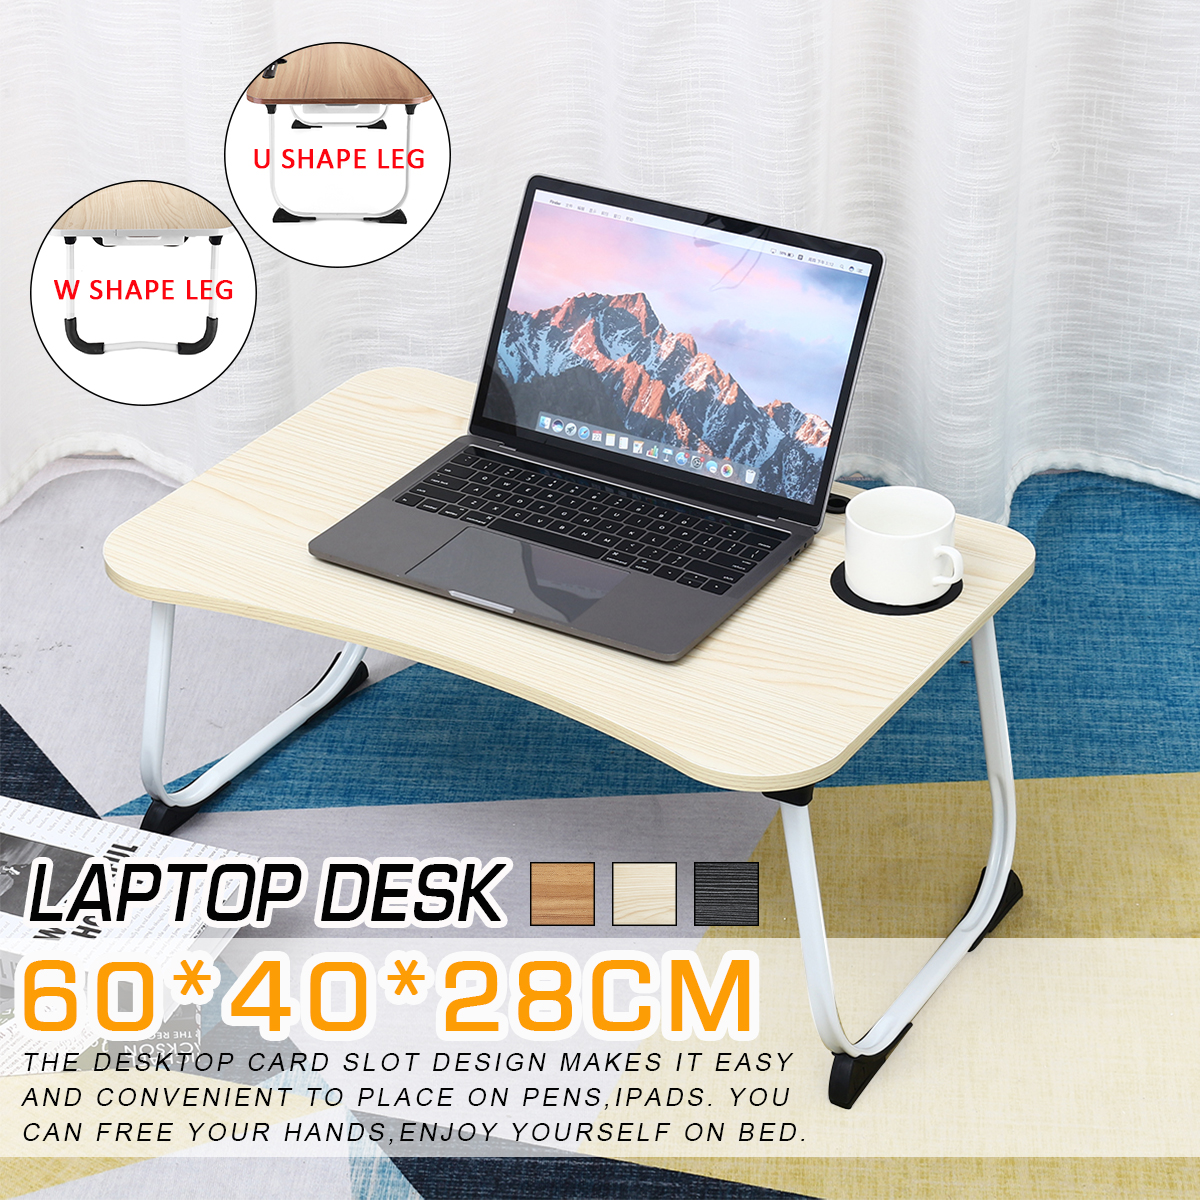 Multifunctional-Folding-Wooden-Lazy-Bed-Desk-Macbook-Table-with-Pen-Cup-Slot-Storage-Drawer-1874952-1